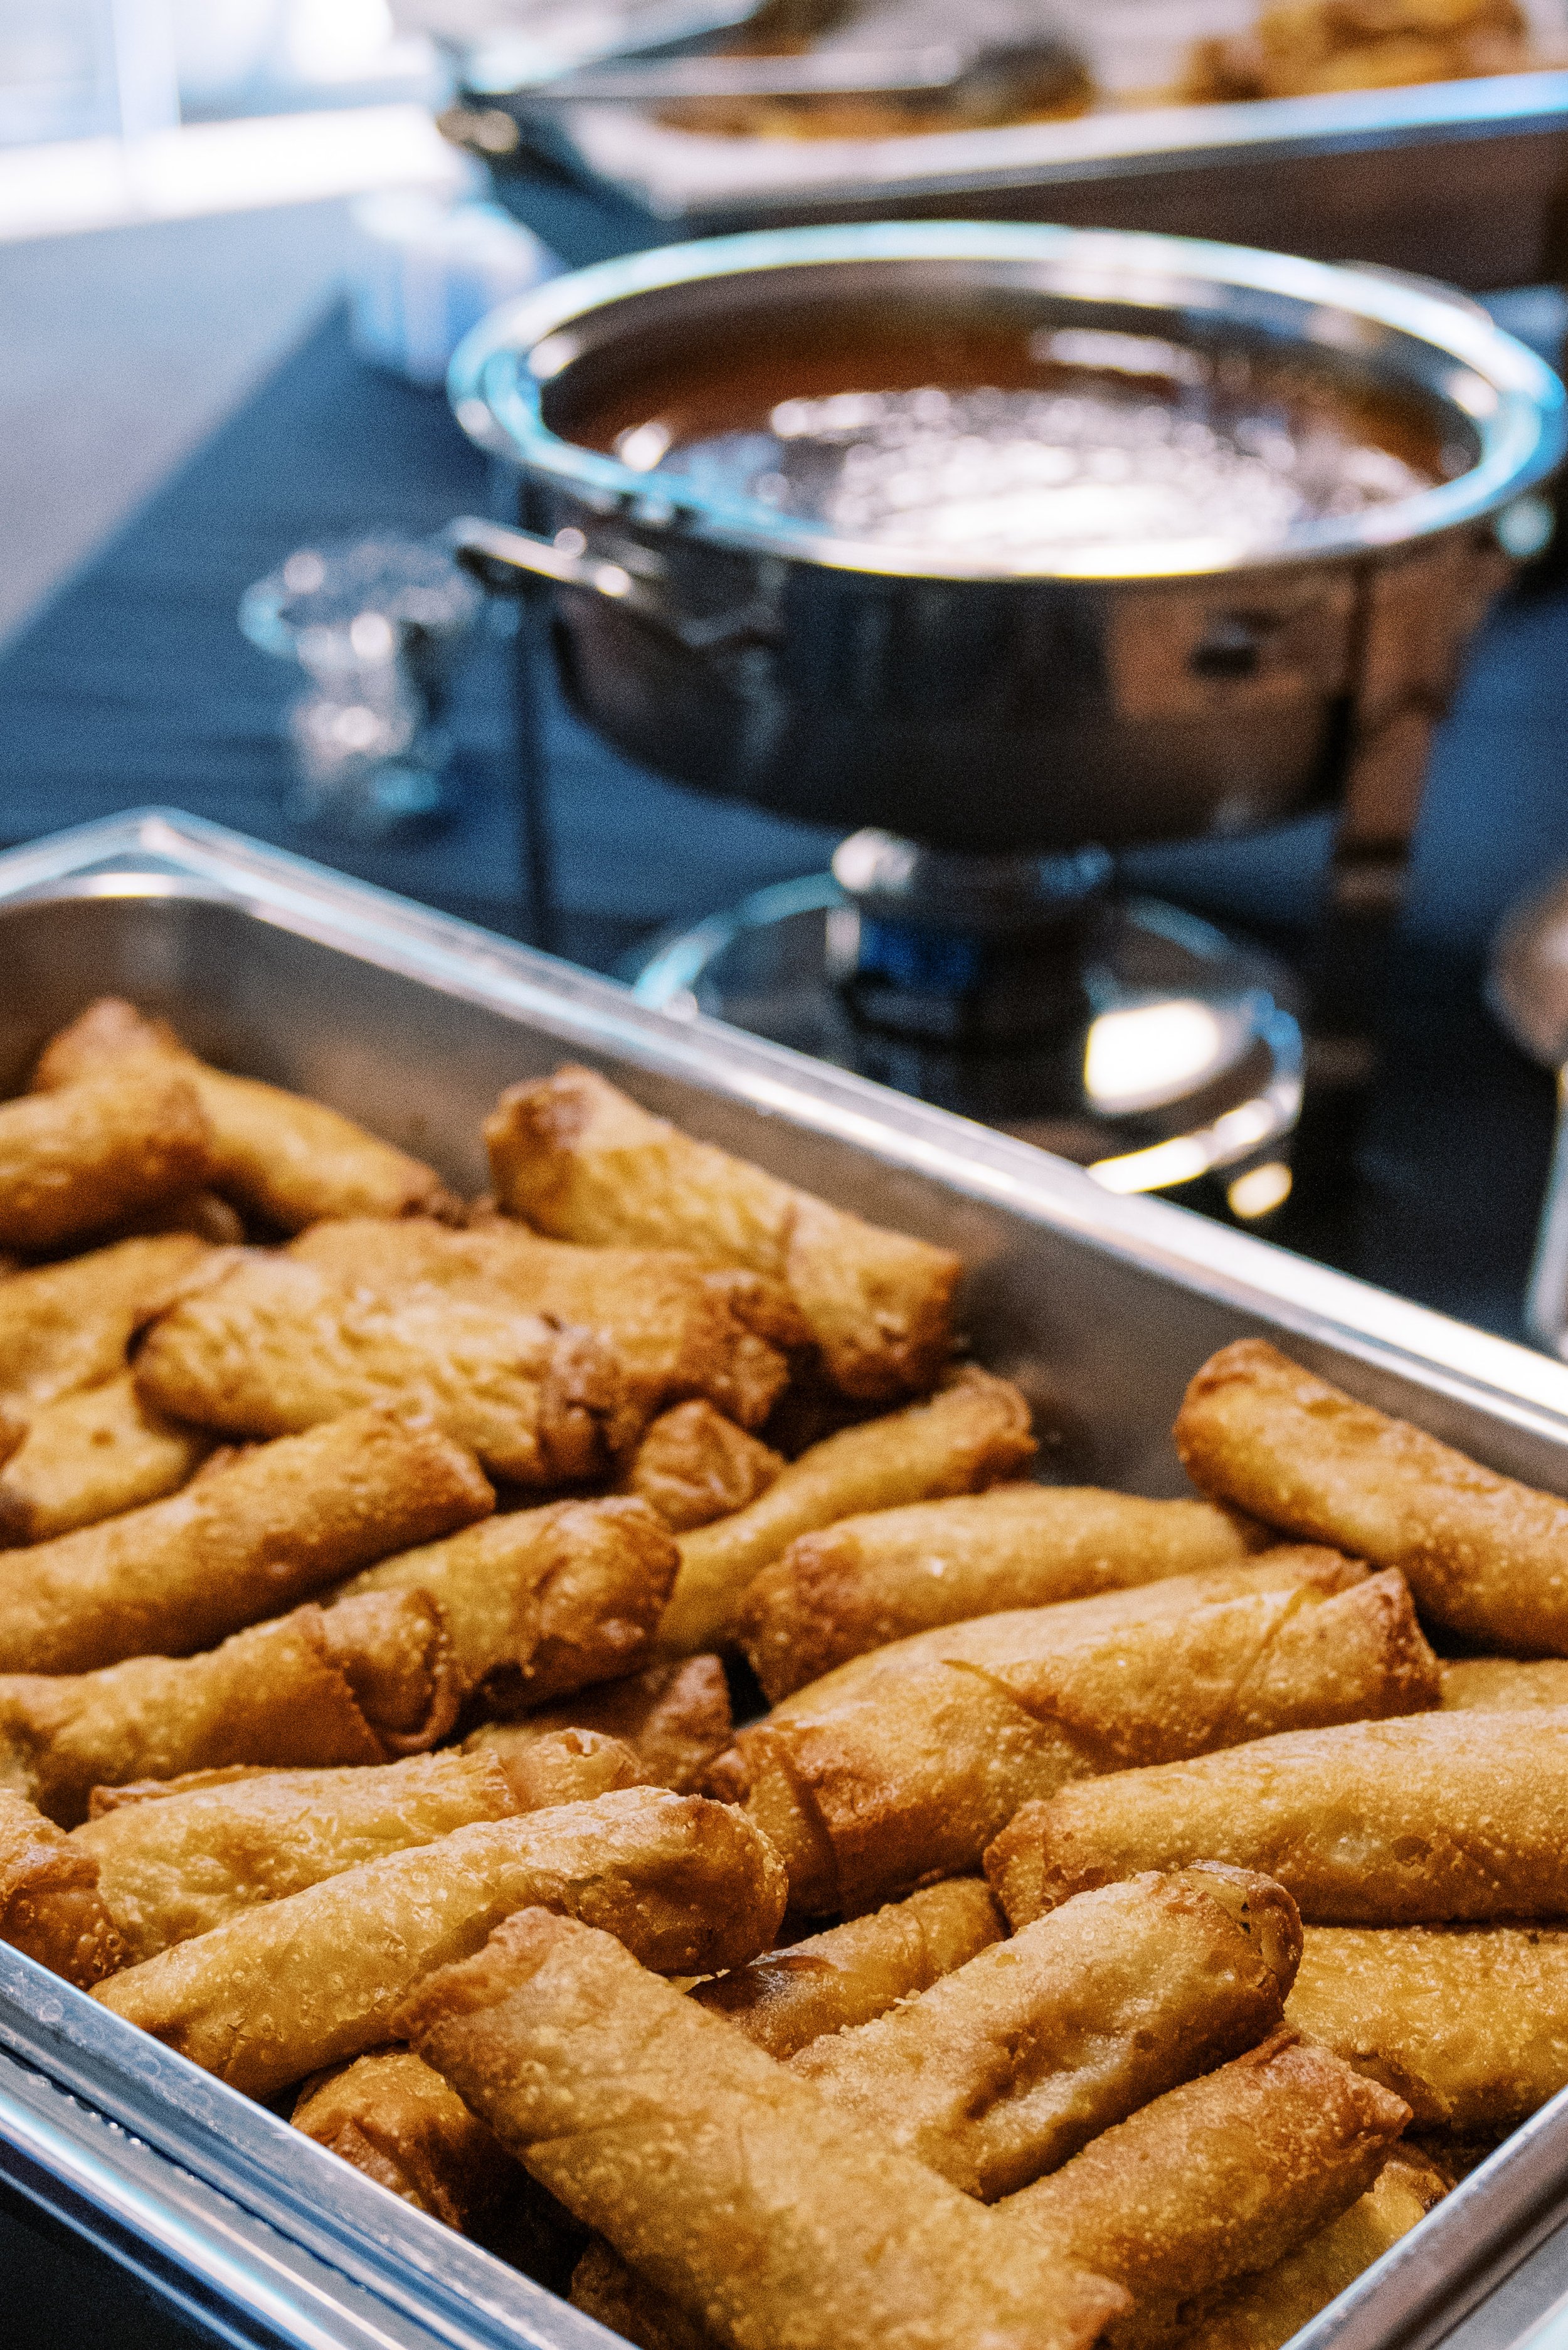 Fried Food Cape Fear Botanical Garden Wedding Fancy This Photography